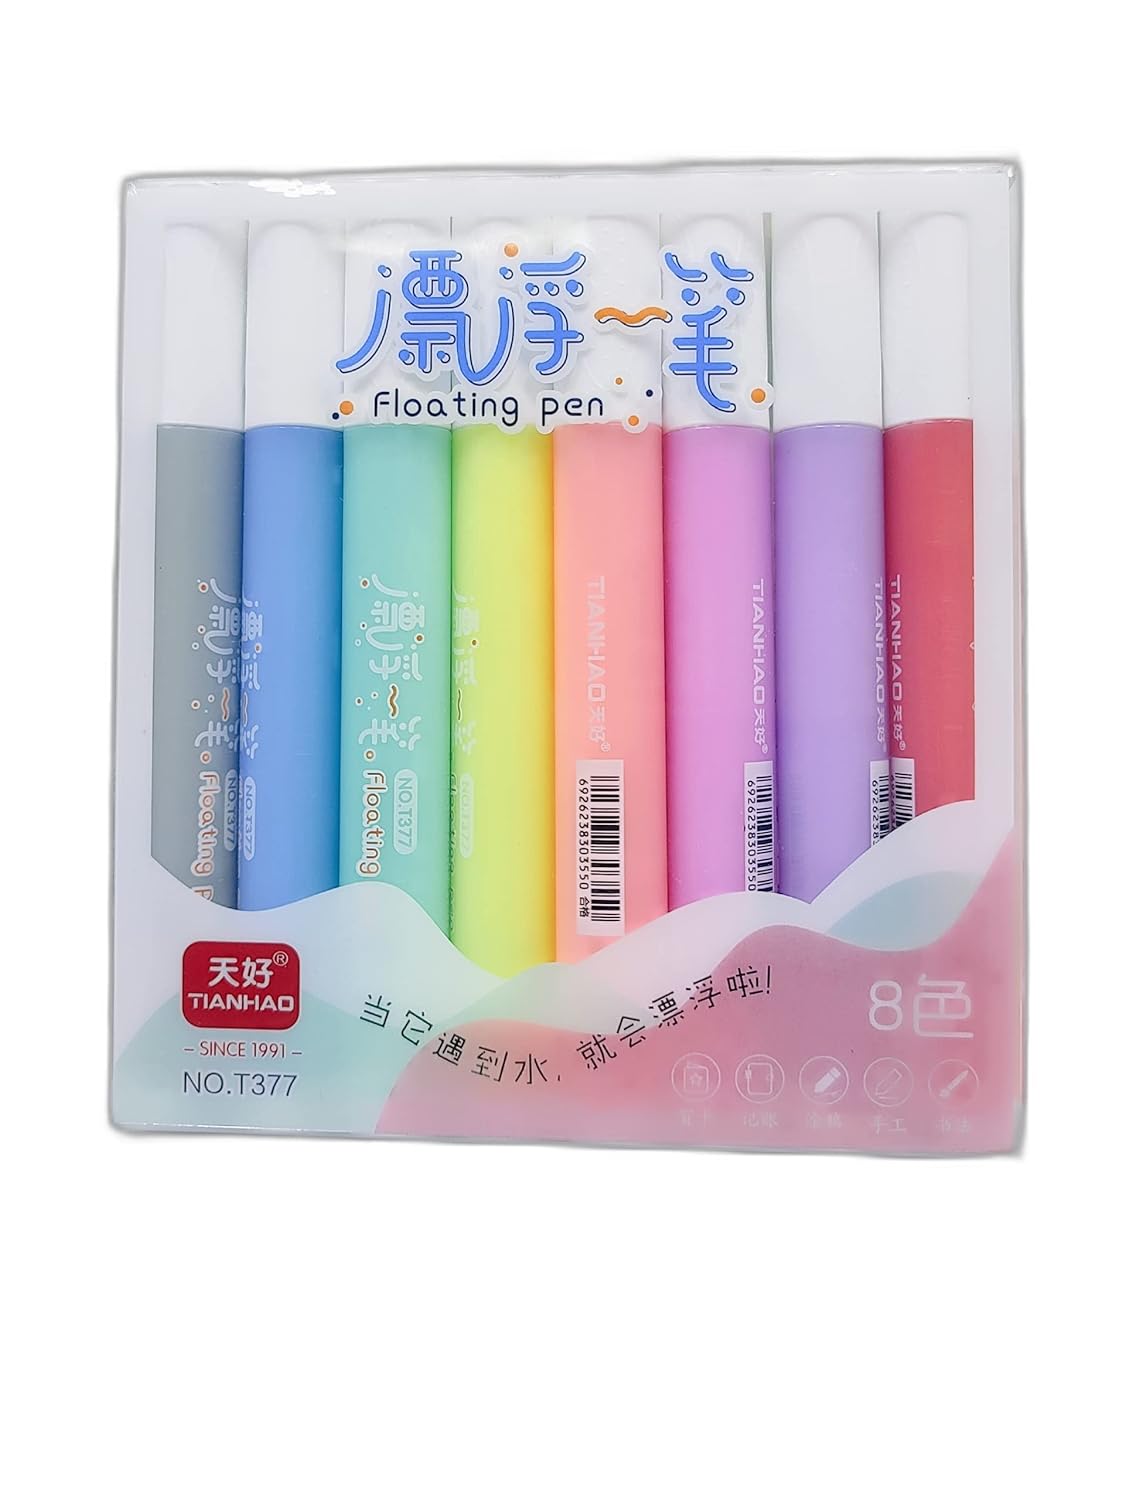 Floating Pen 8 Colors Doodle Pen Children's Colorful Marker Pen Magical Water Painting Pen Easy -to-Wipe Dry Erase Whiteboard Pen Doodle Water Floating Pen.